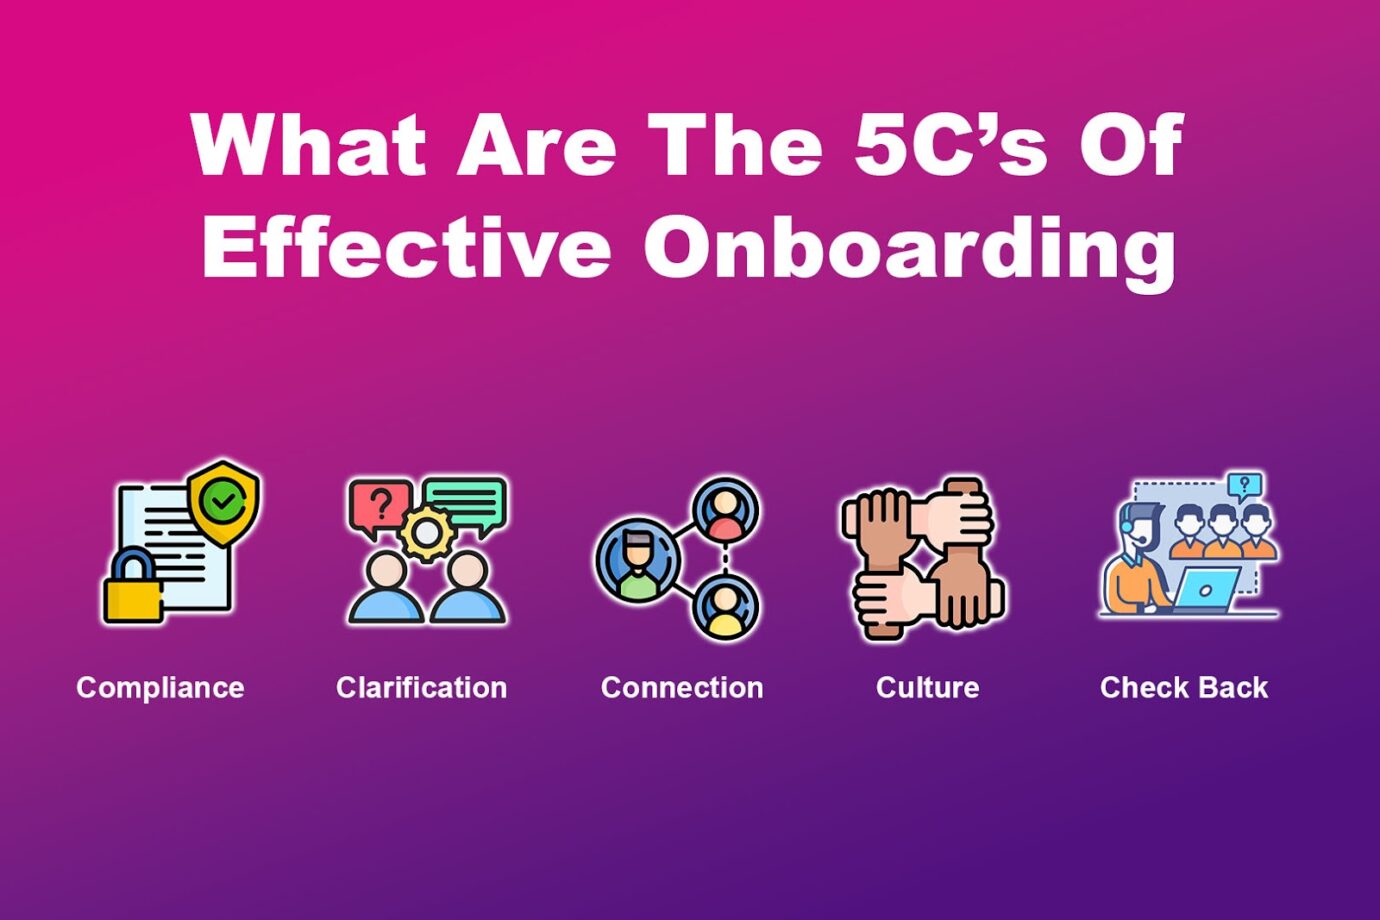 What Are The 5C’s Of Effective Onboarding